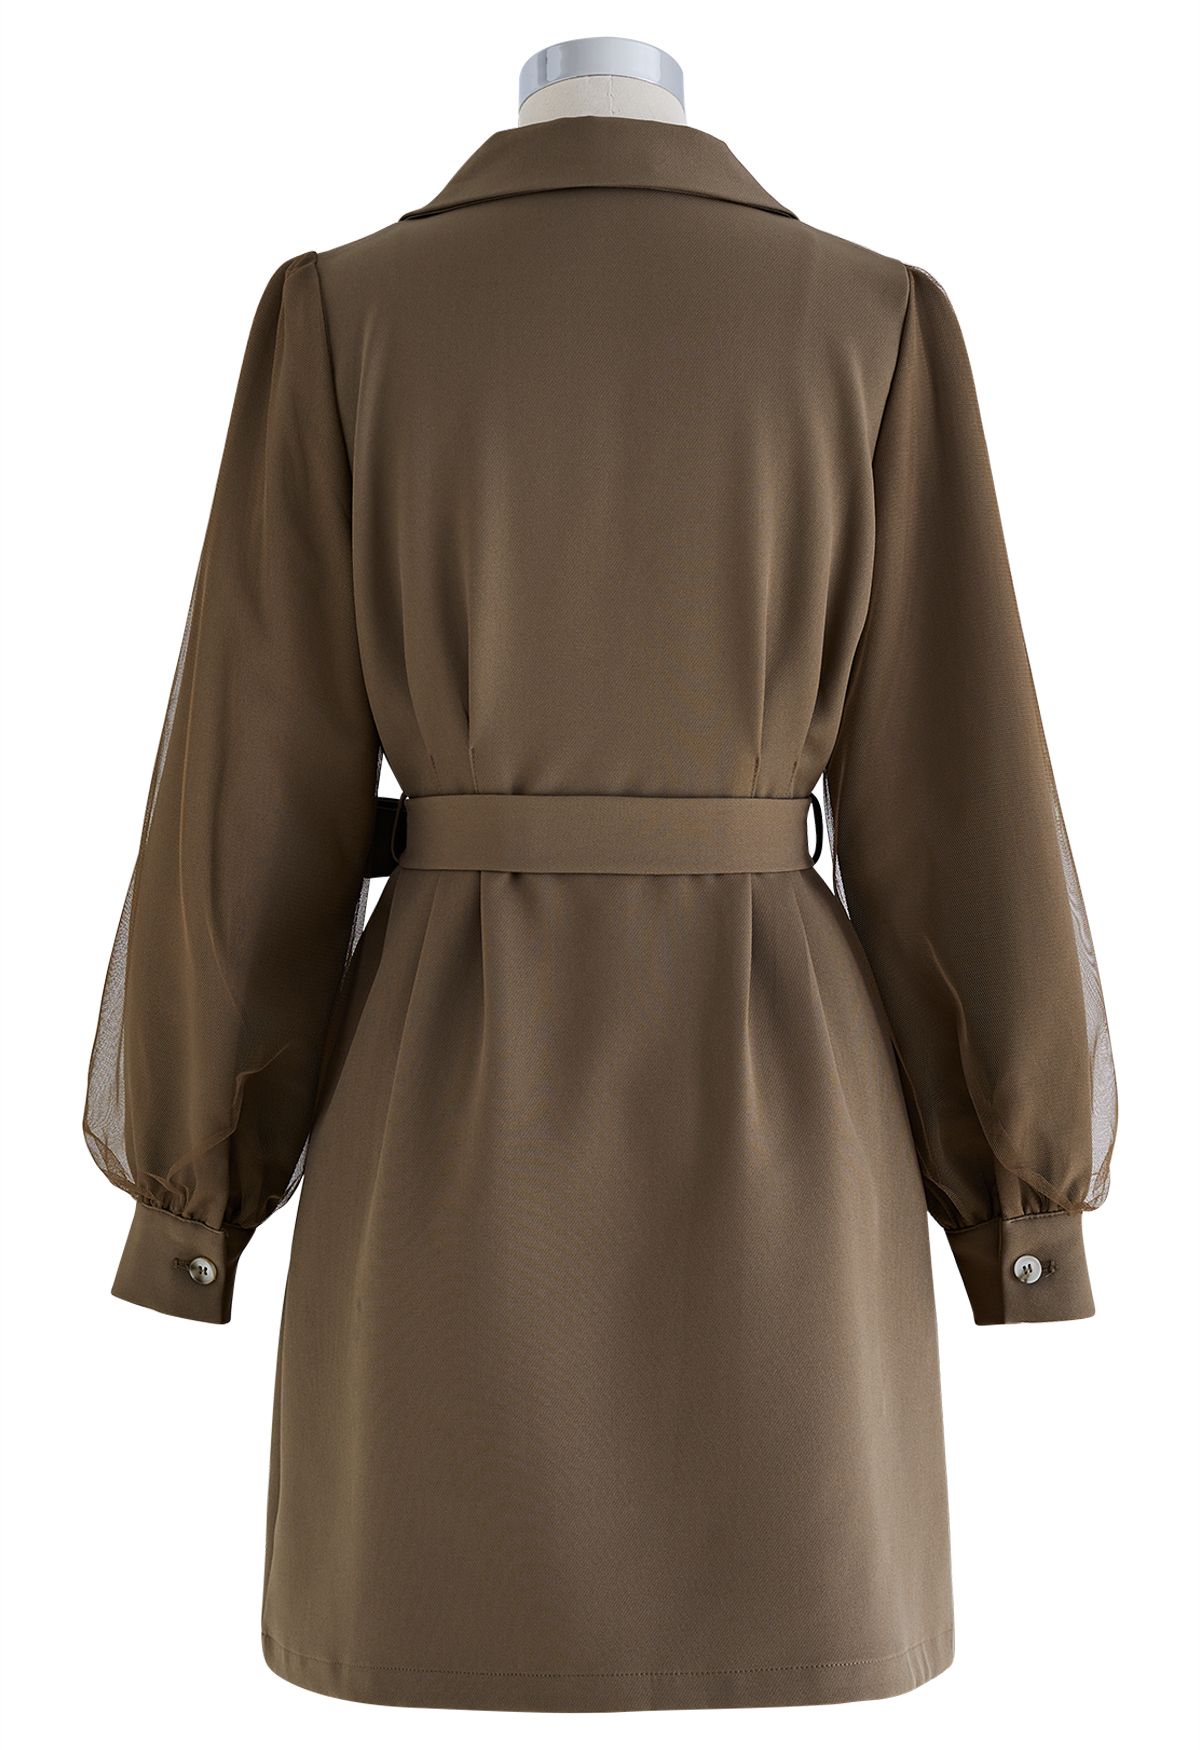 Mesh Overlay Sleeve Double Breasted Blazer Dress in Brown